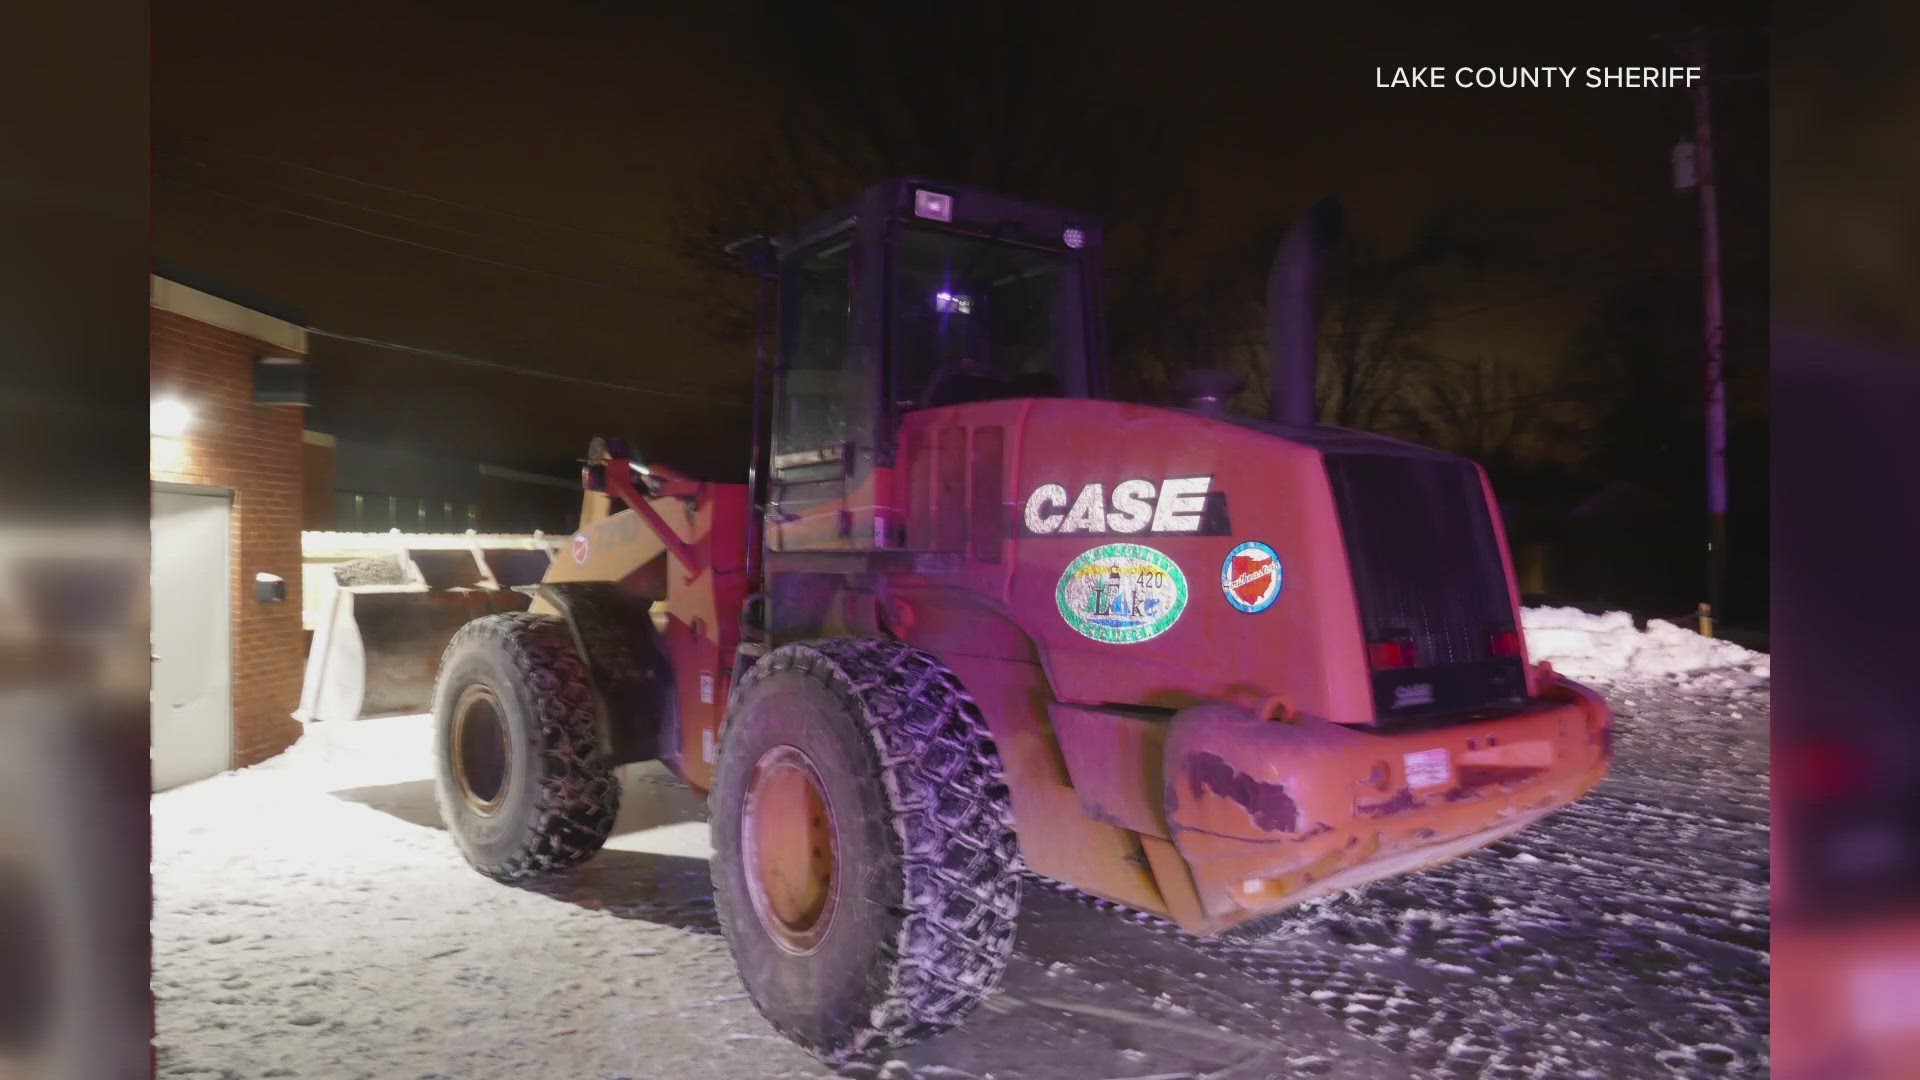 A 54-year-old man was arrested after refusing to exit the wheel loader that he allegedly stole from the Lake County Engineer's Office in Painesville Township.